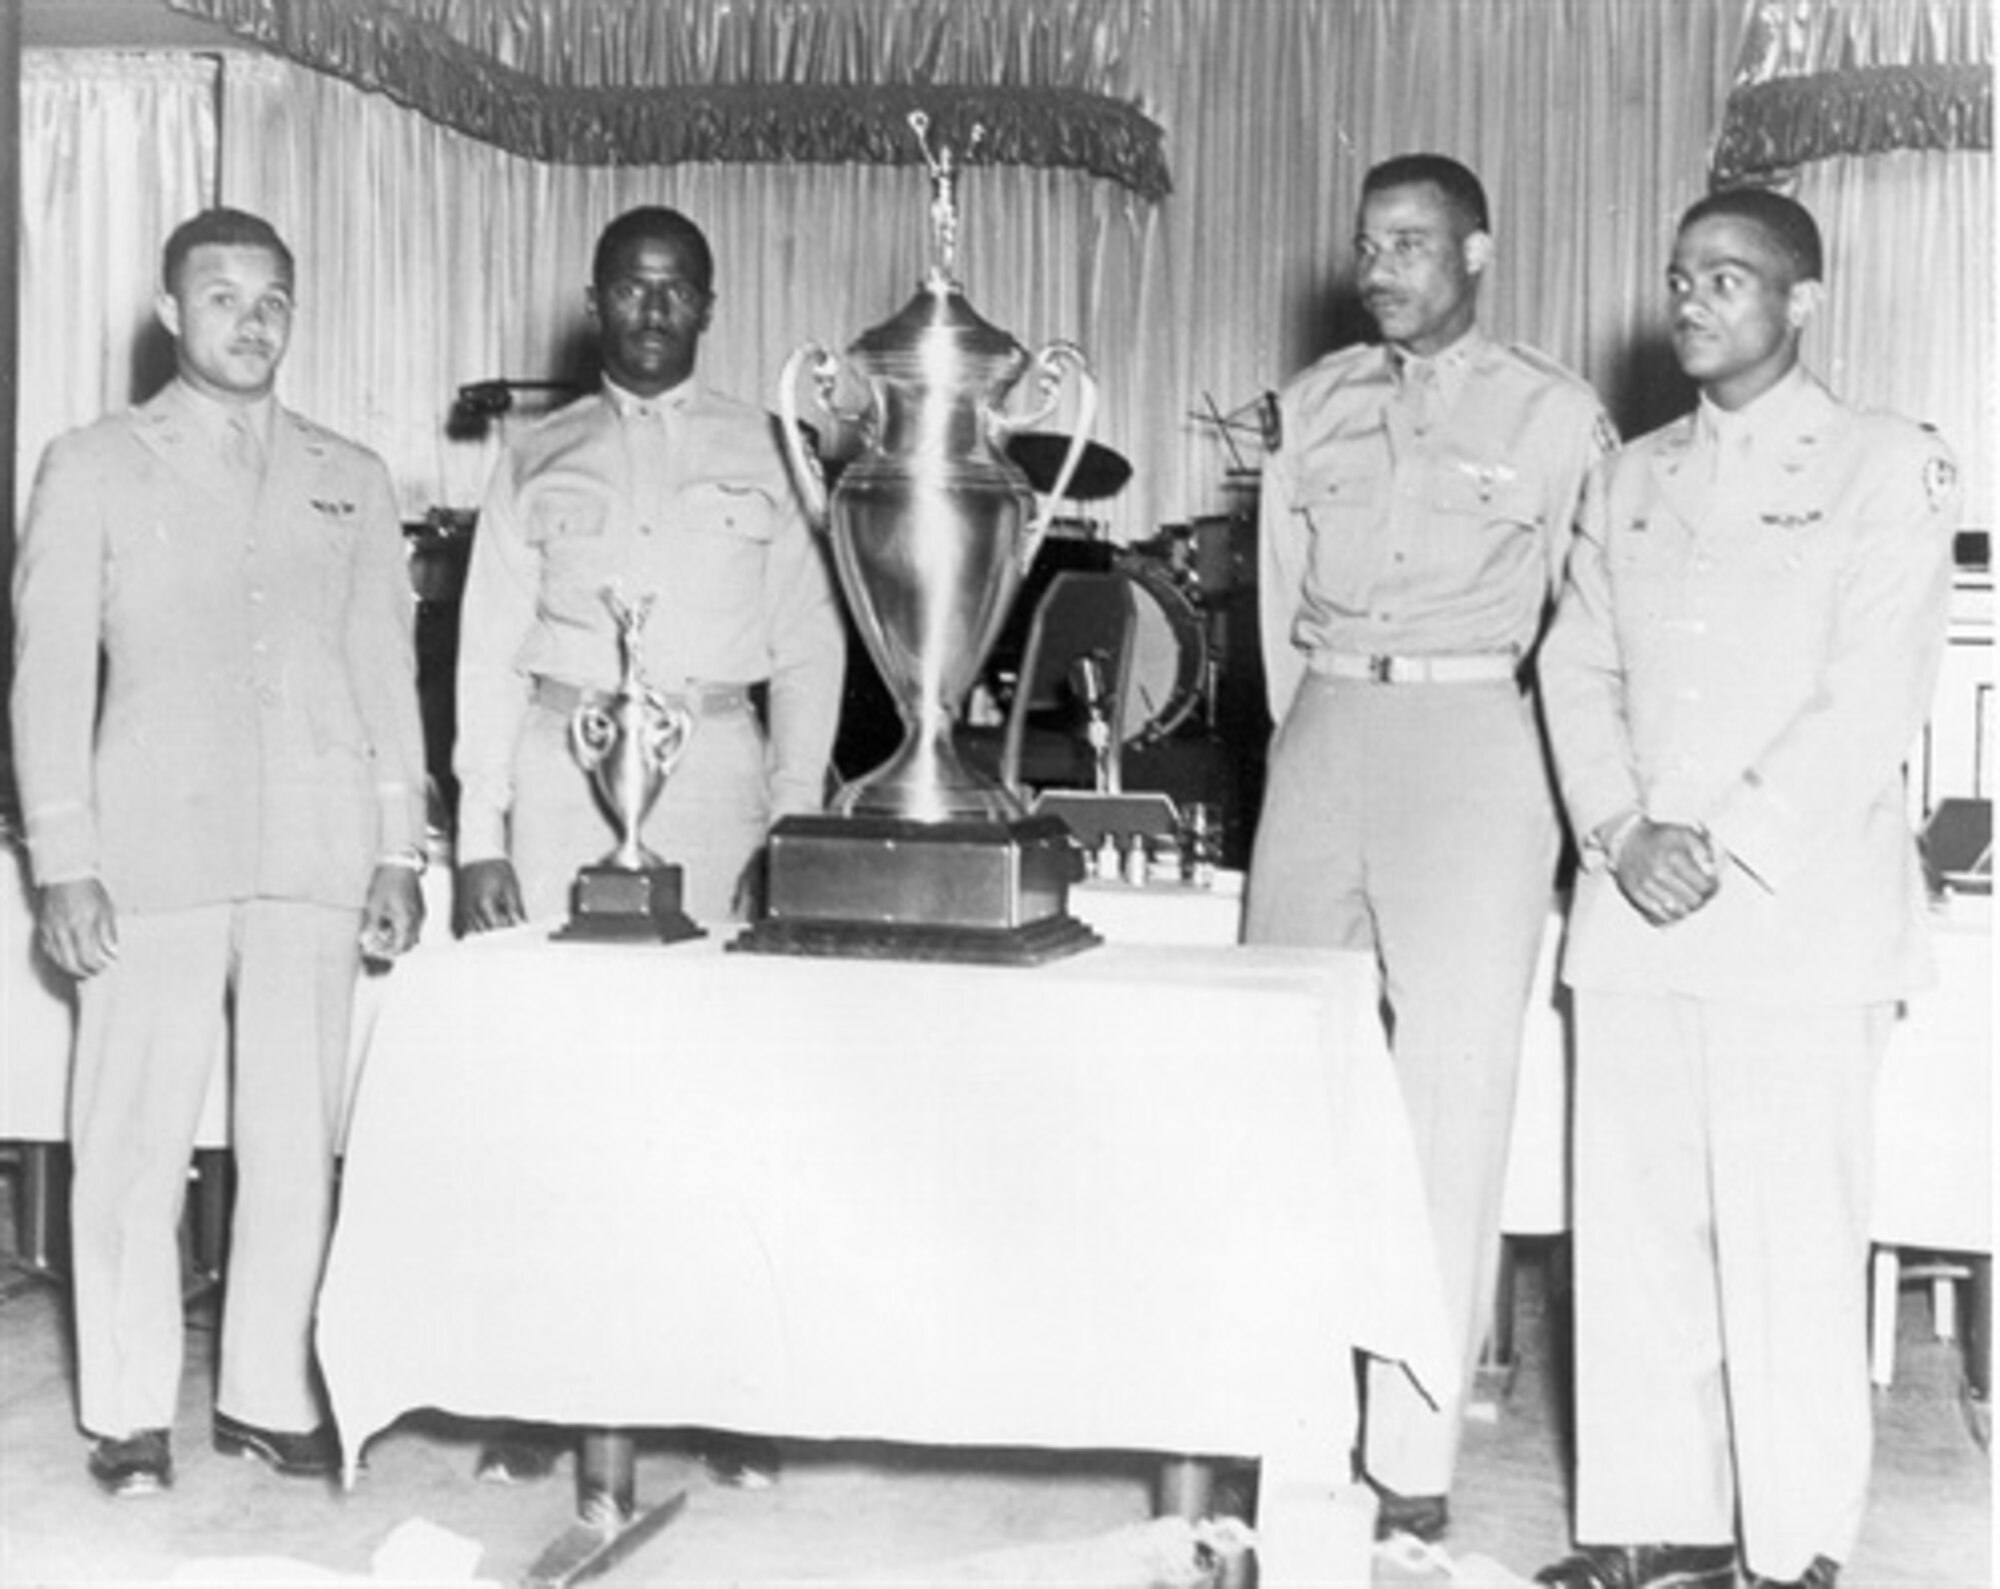 Capt. Alva Temple, 1st Lt. James Harvey, 1st Lt. Harry Stewart and 1st Lt. Halbert Alexander, the winners of the Air Force's first "Top Gun" competition, pose with the trophy during May of 1949. The trophy went missing for 55 years, but was found at the storage area of the National Museum of the U.S. Air Force at Wright Patterson Air Force Base, Ohio.